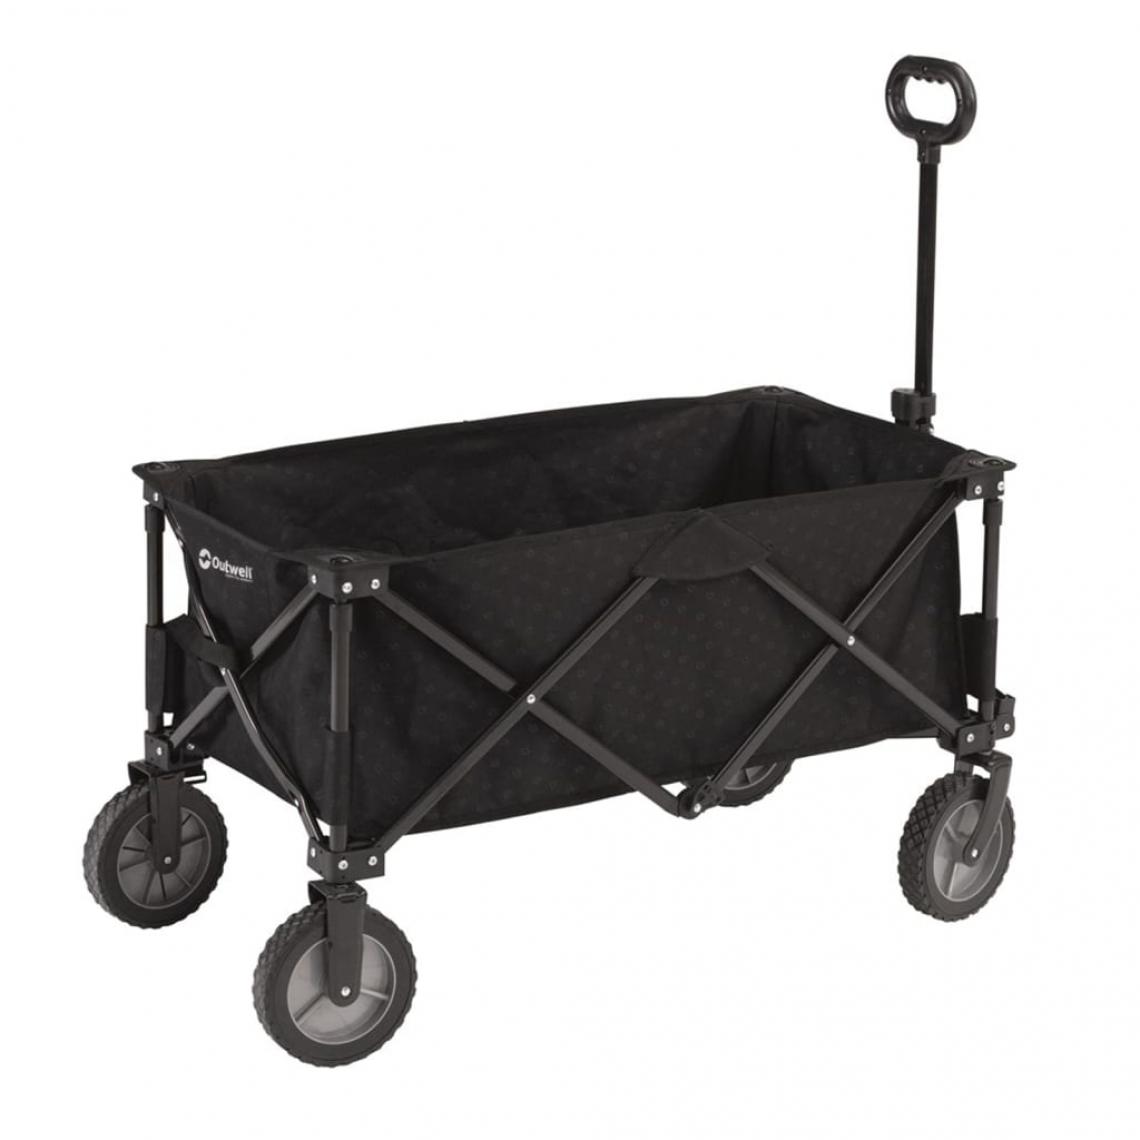 Outwell - Outwell Chariot pliable Cancun Transporter Noir - Diable, chariot